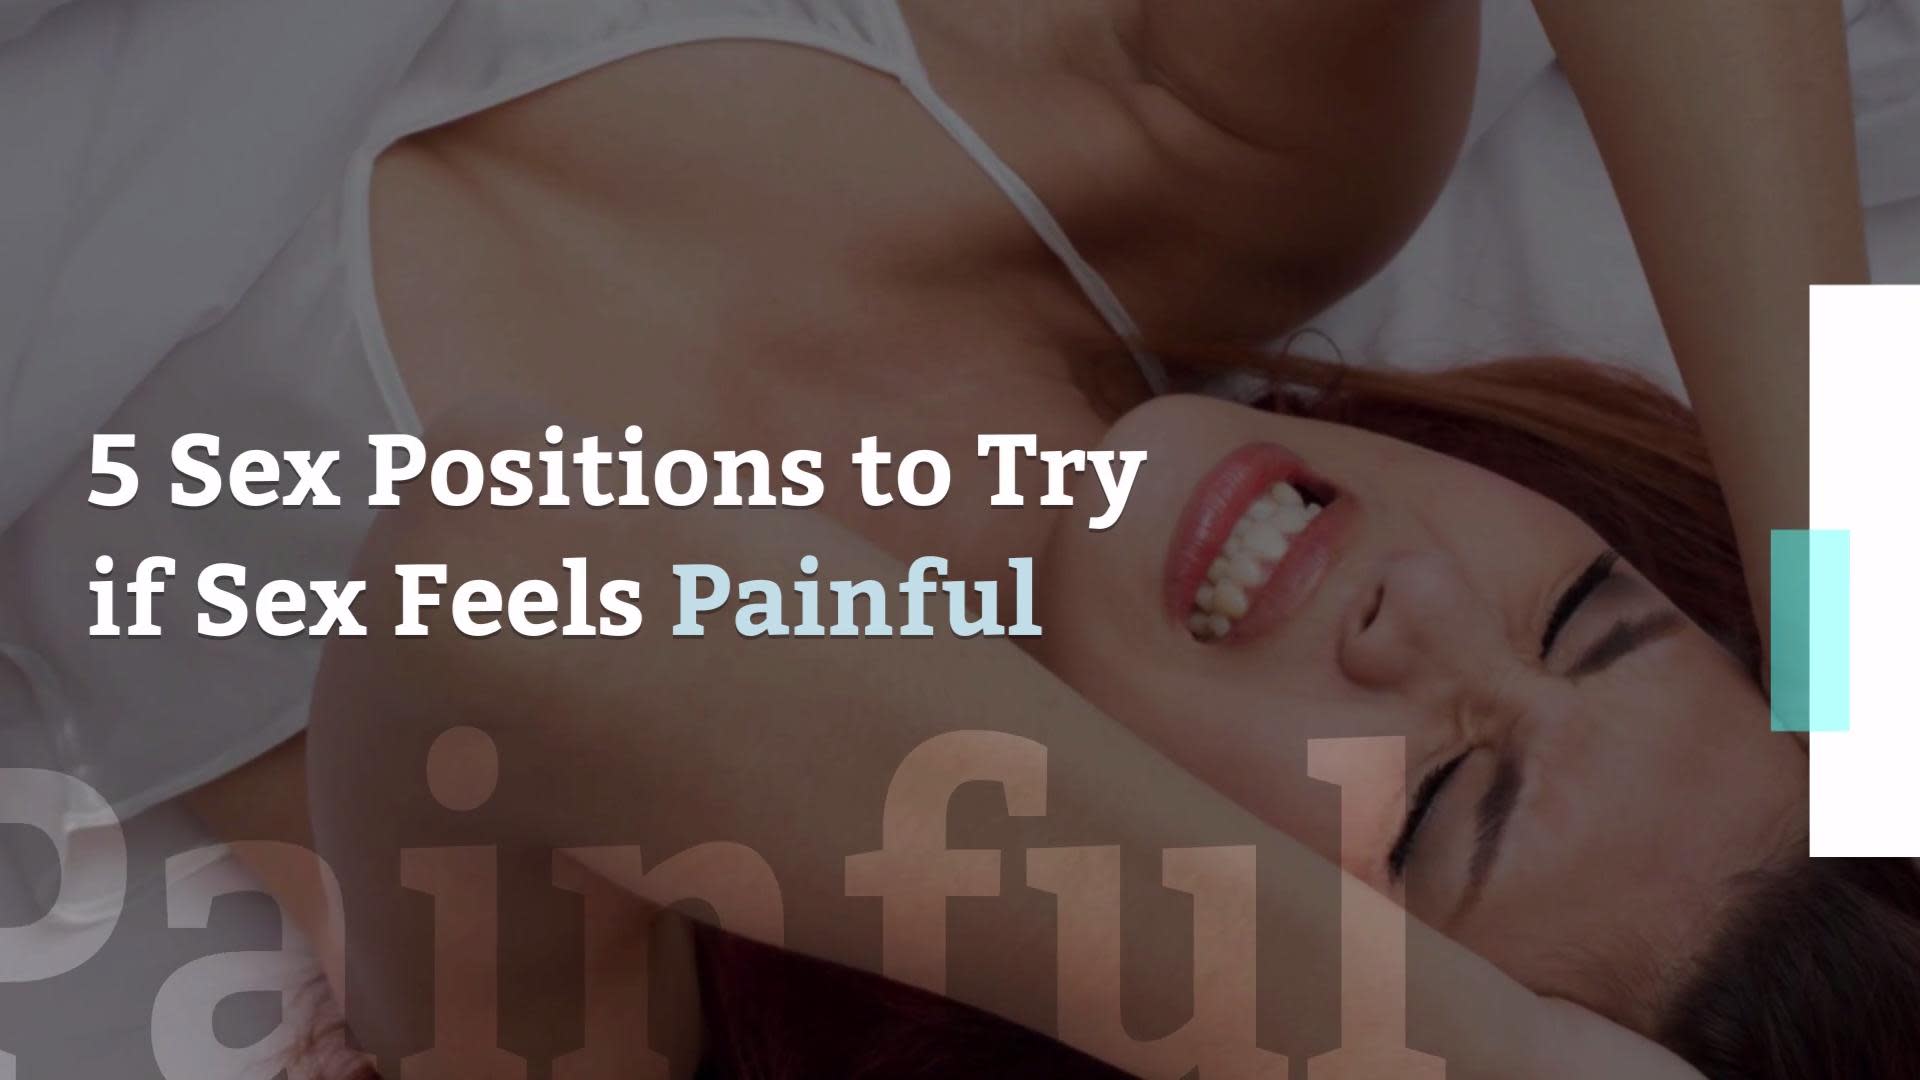 6 Sex Positions to Try if Sex Is Painful image